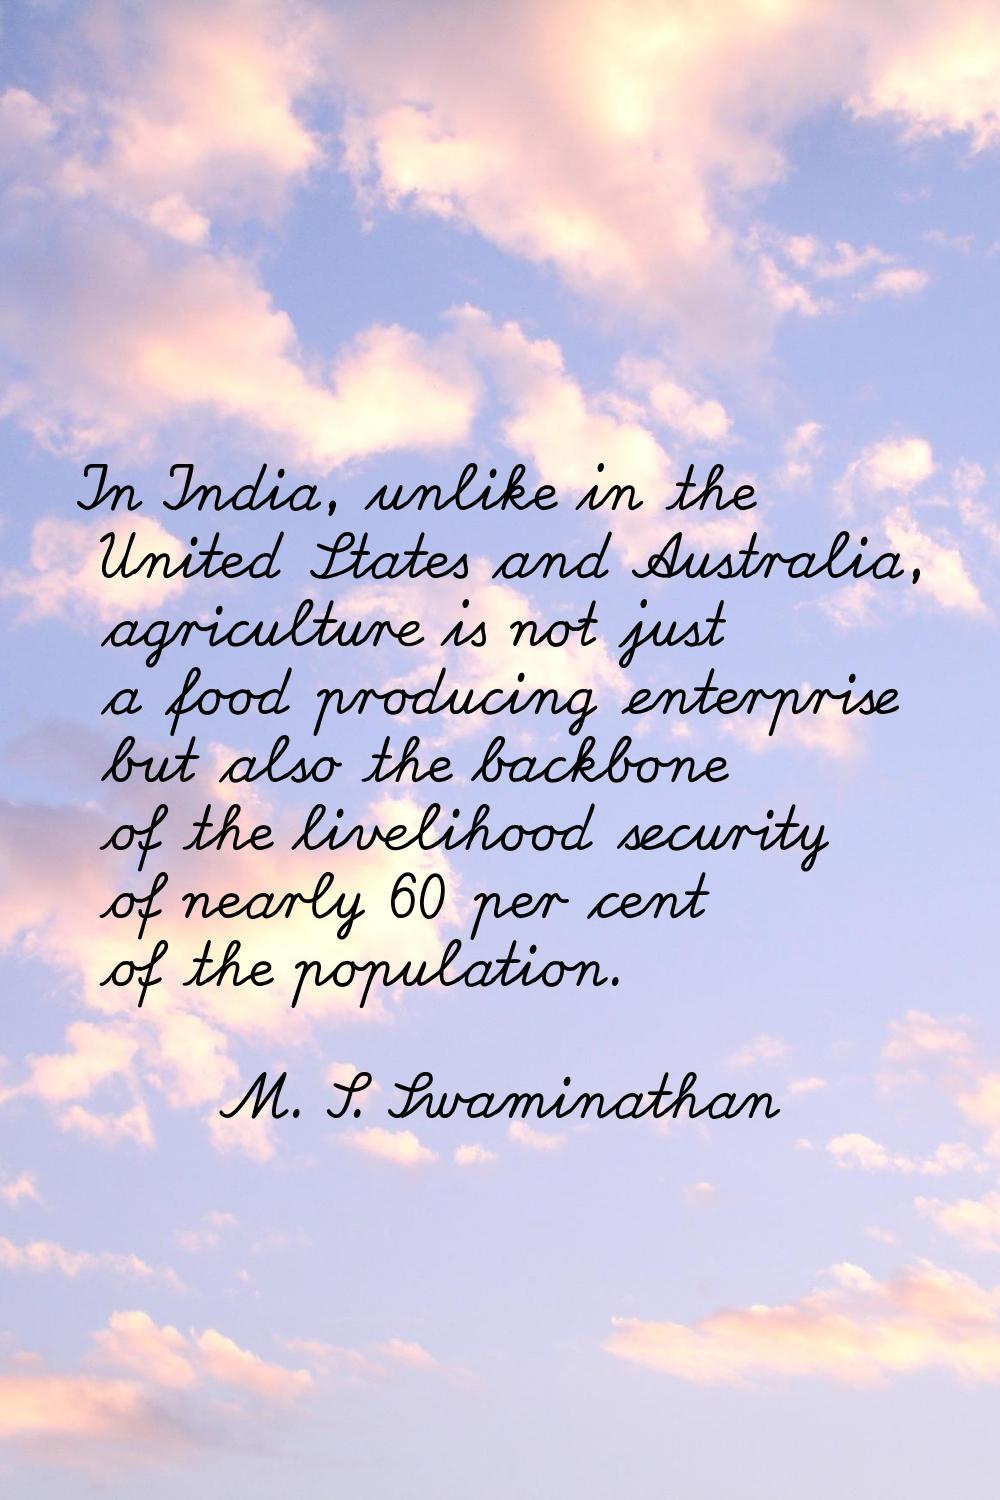 In India, unlike in the United States and Australia, agriculture is not just a food producing enter